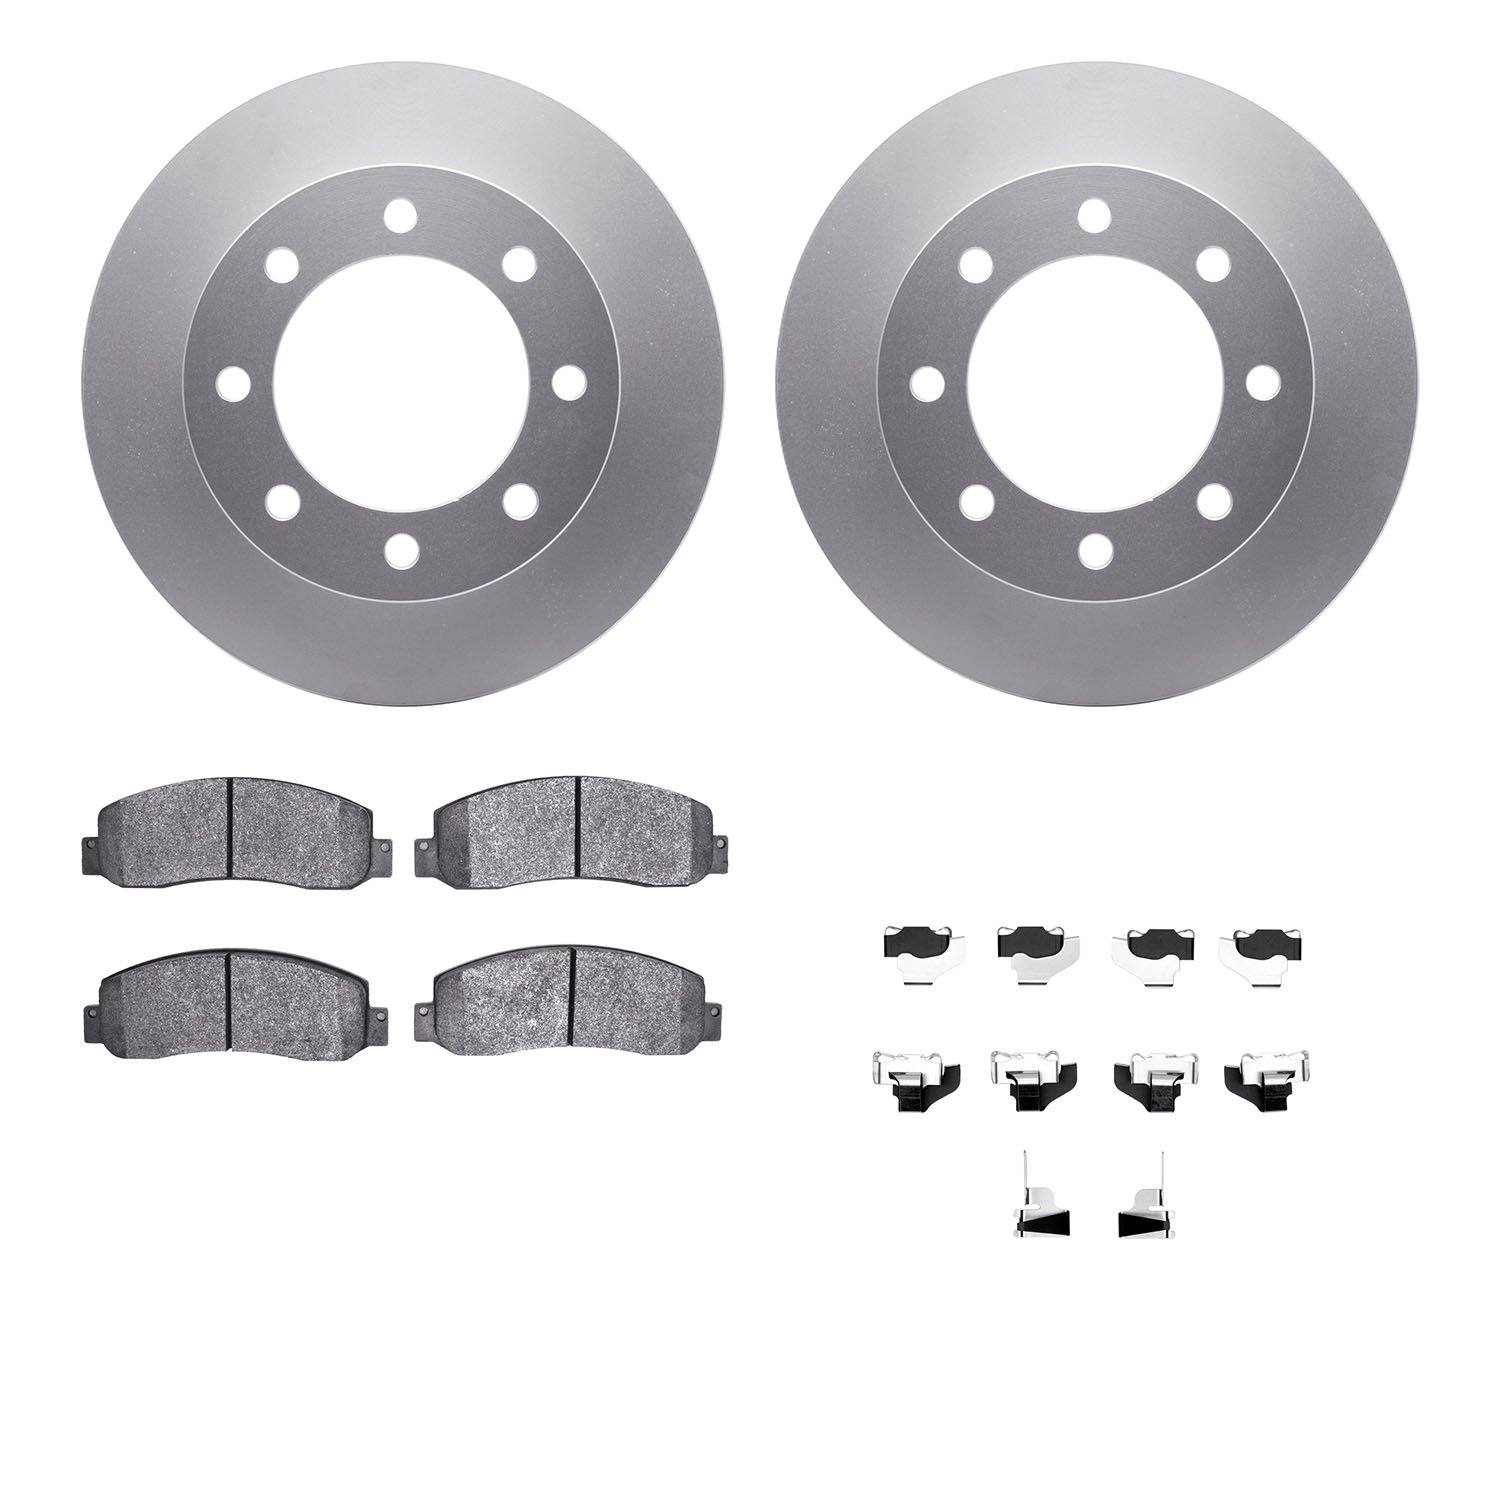 4412-54052 Geospec Brake Rotors with Ultimate-Duty Brake Pads & Hardware, 2005-2012 Ford/Lincoln/Mercury/Mazda, Position: Front